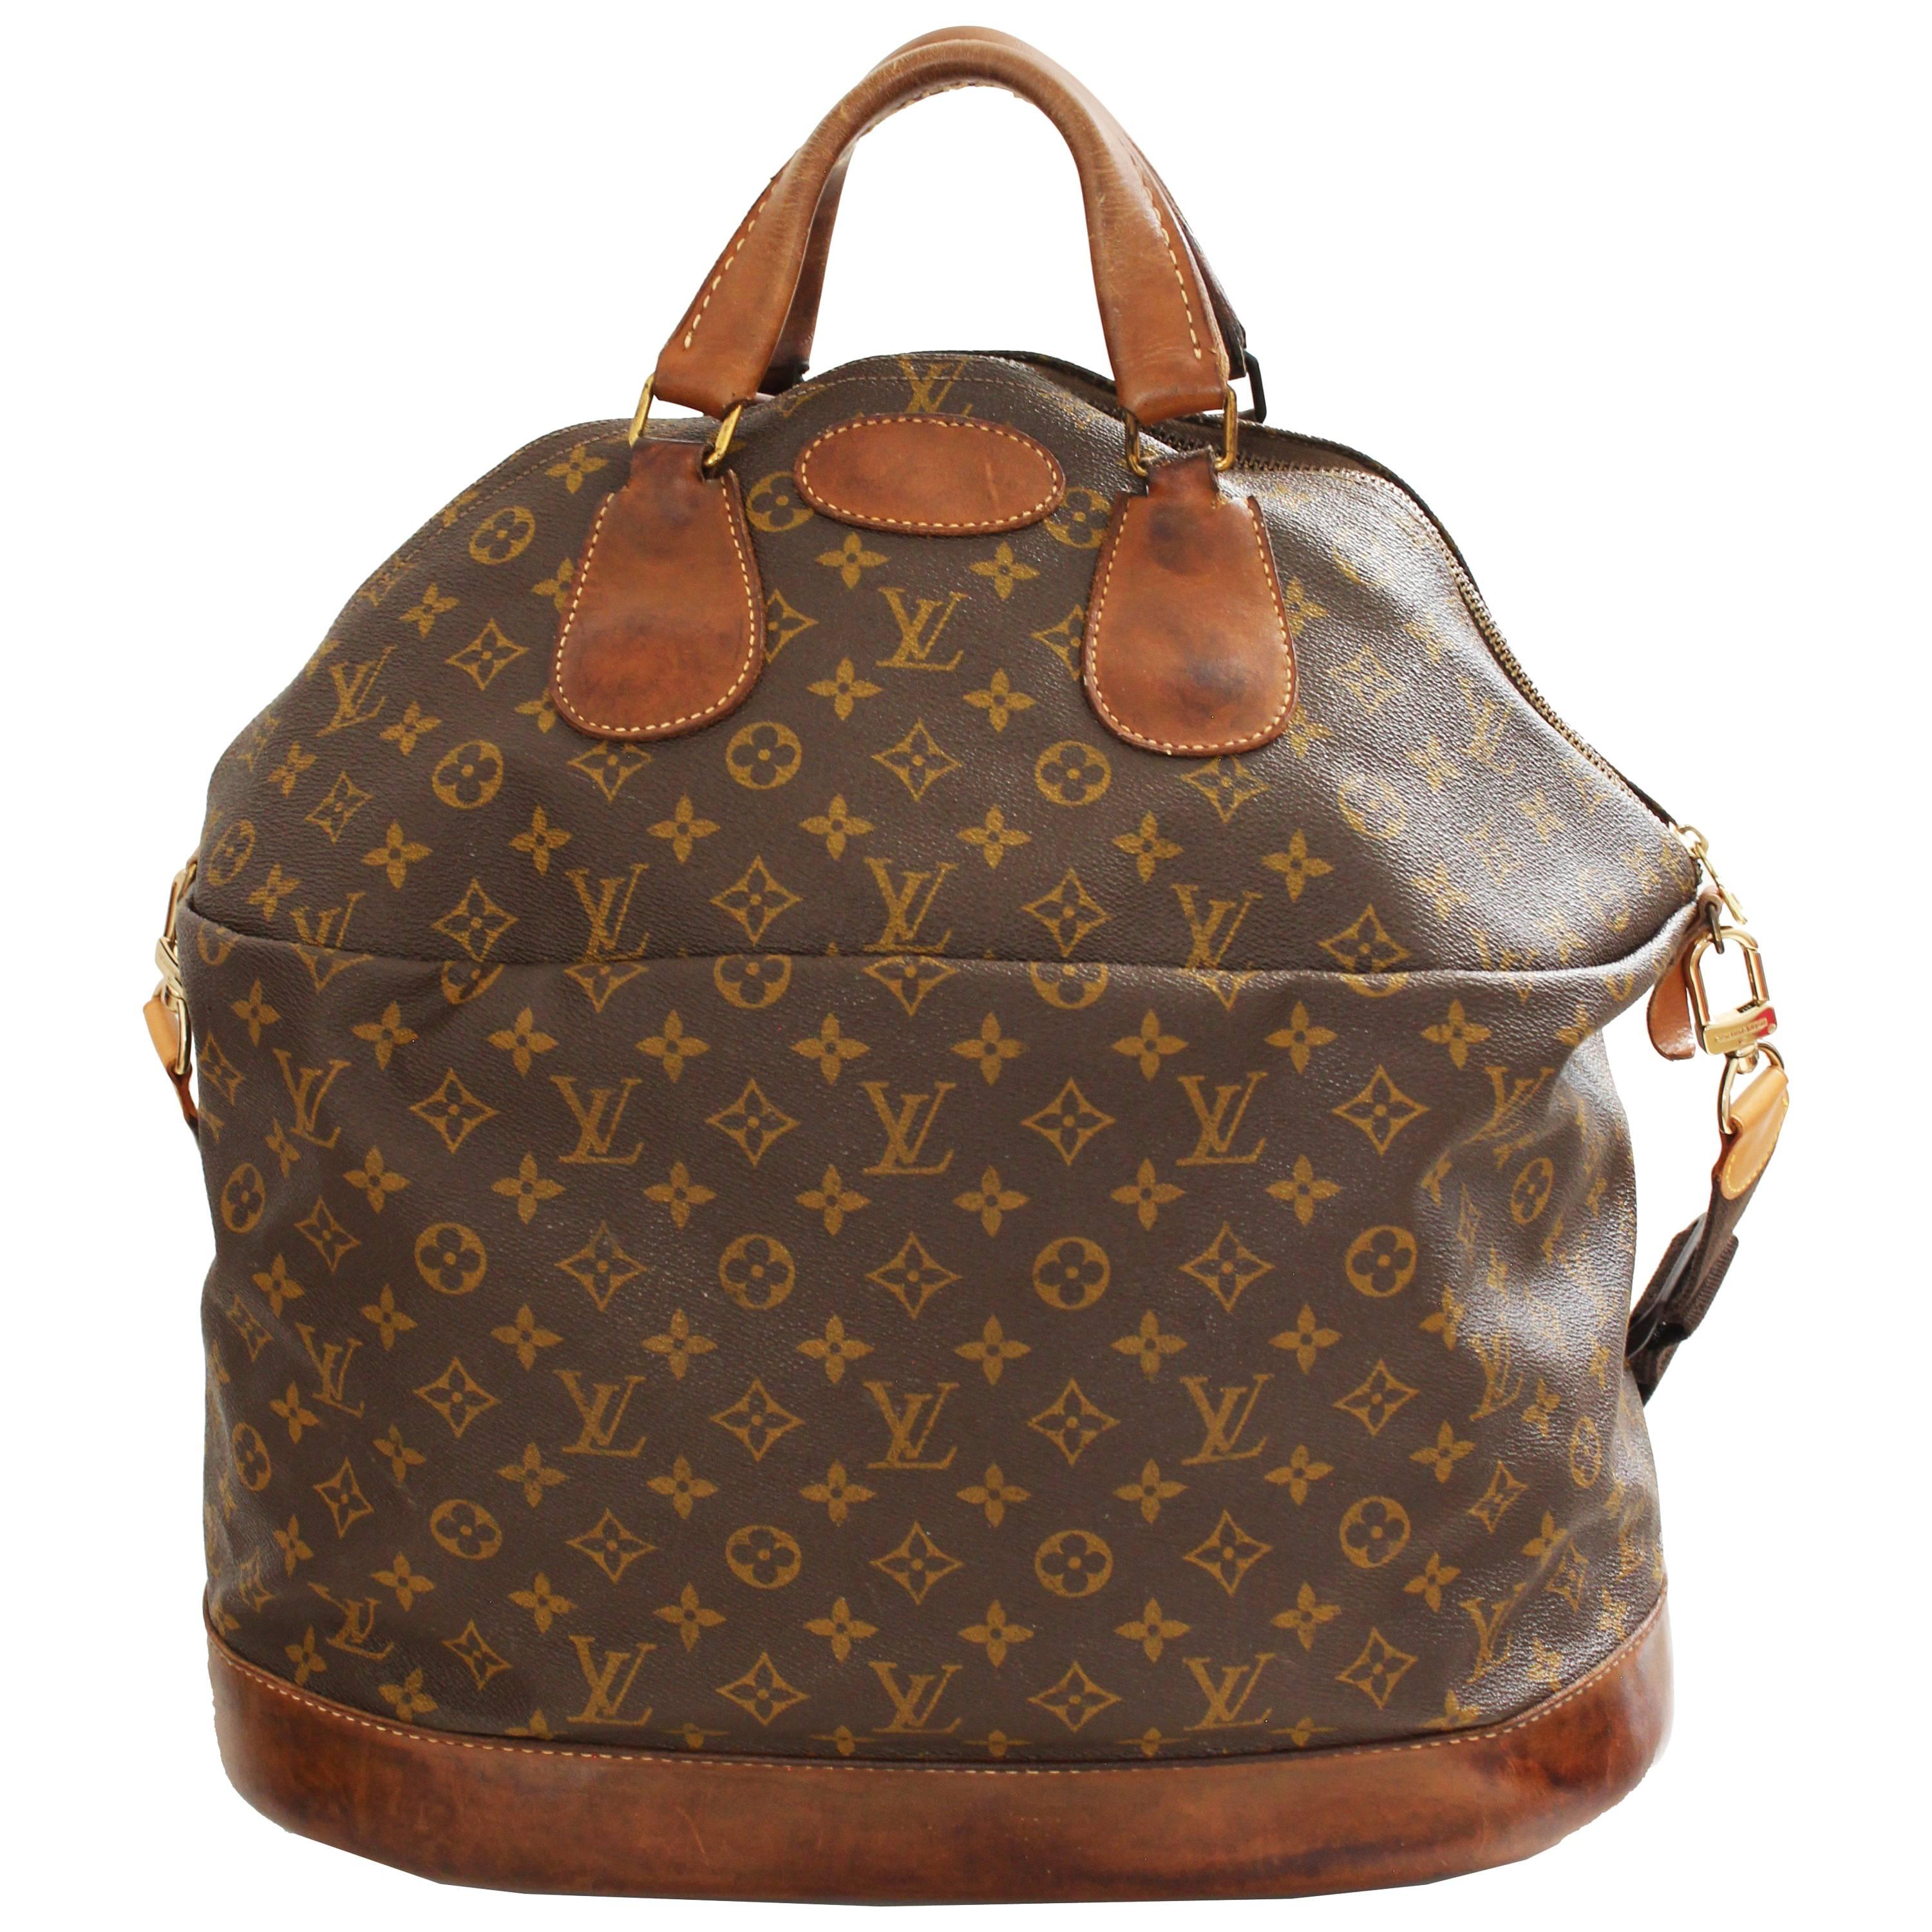 Louis Vuitton Large Steamer Bag Keepall Monogram Travel Tote French Company 70s 